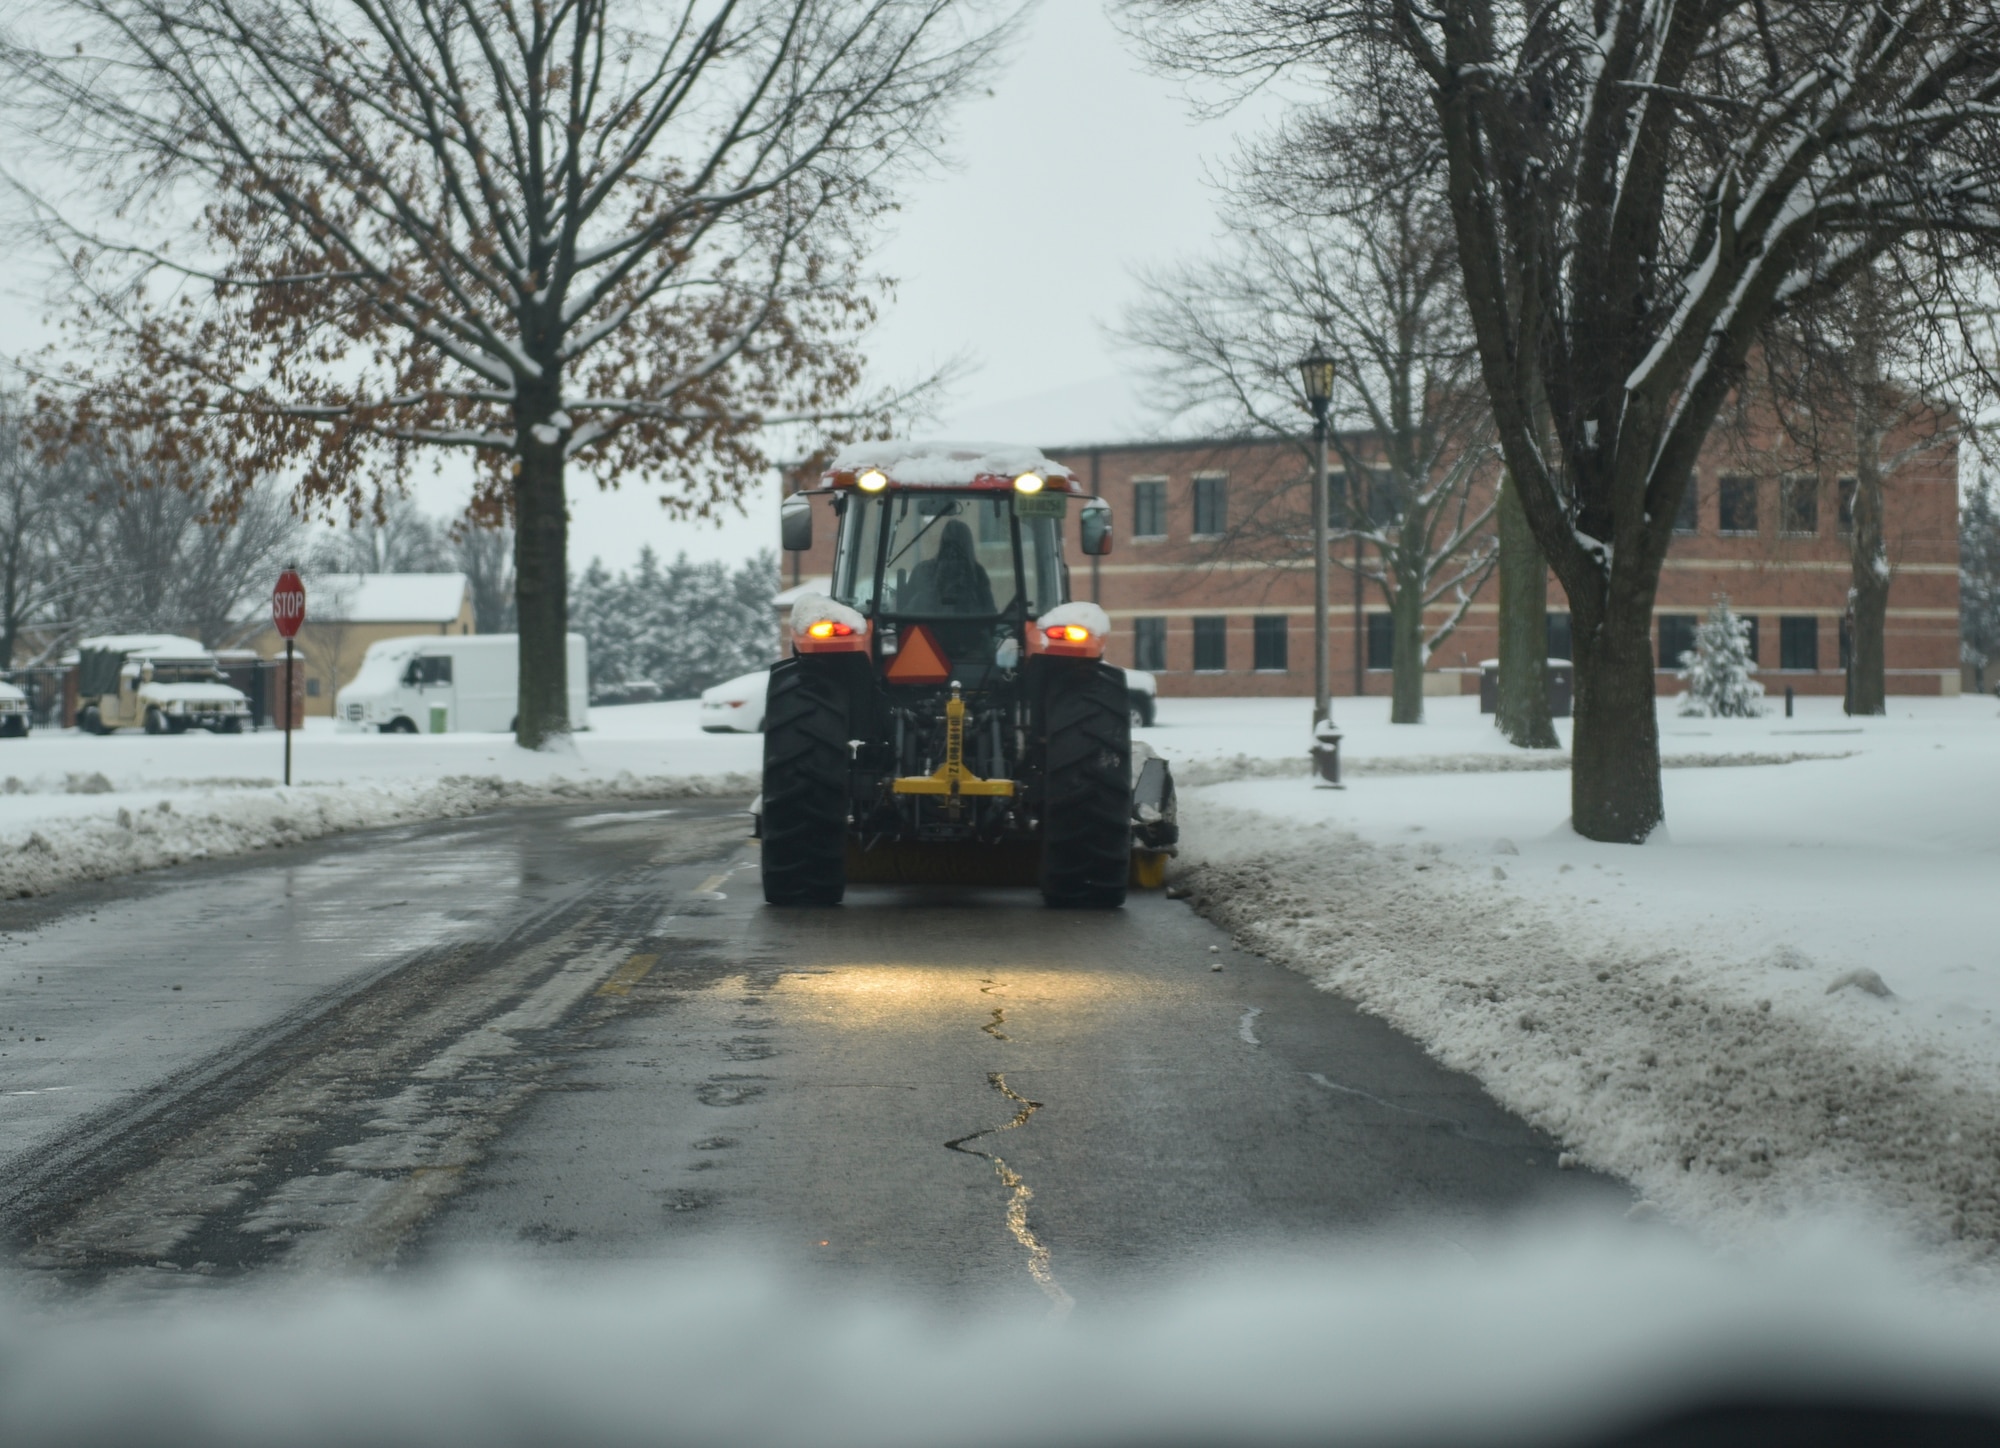 Members of the 375th Civil Engineer squadron spent the morning of Jan. 12, 2019, clearing roads at Scott Air Force Base, Illinois, after heavy snowfall. Each shift required about 20 people to aid in the process of clearing the roads to ensure motorists are safe.